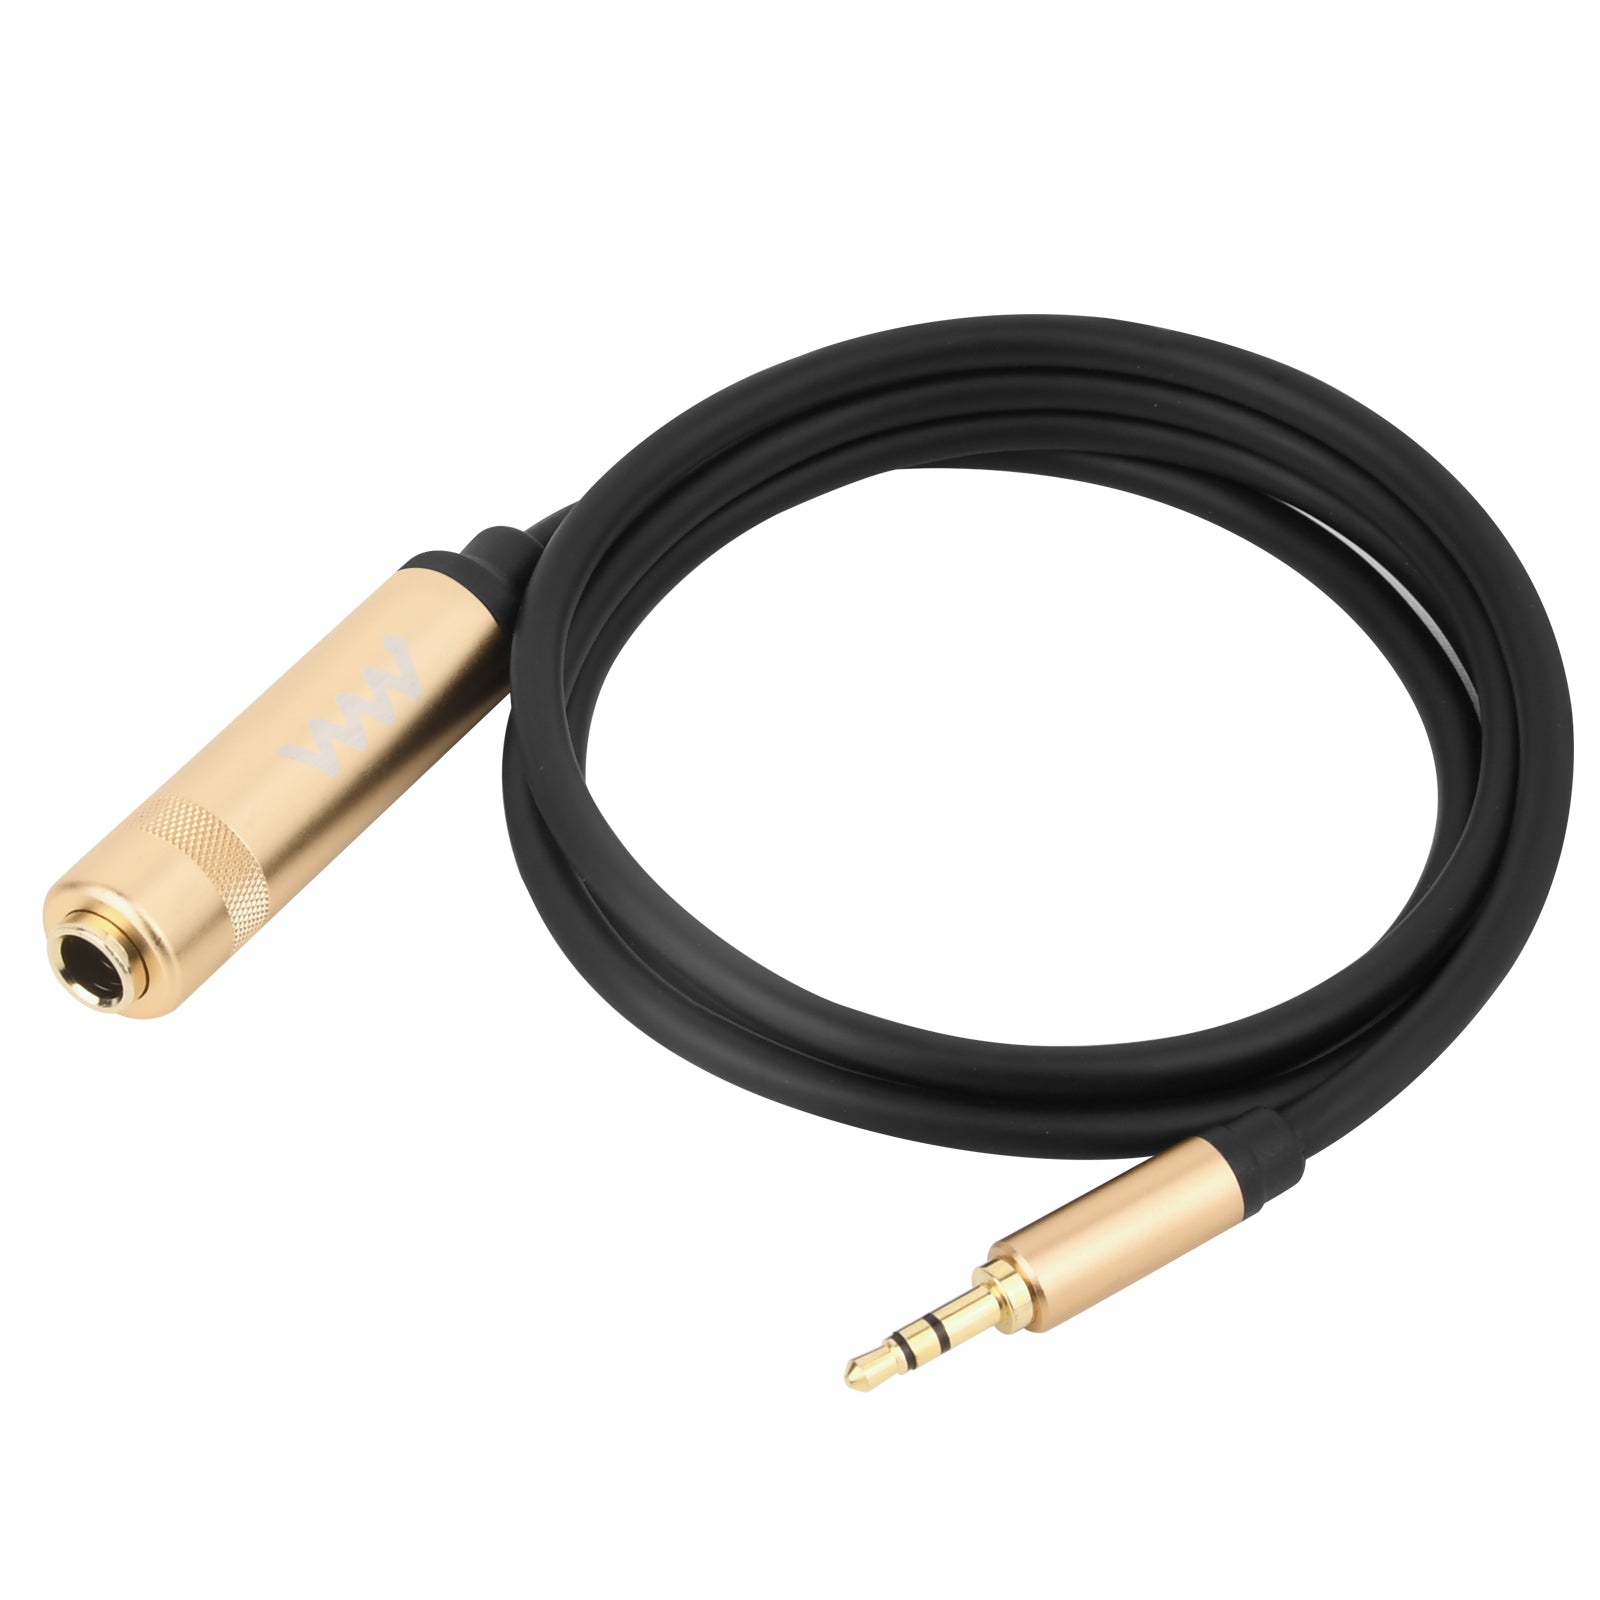 6.35mm TRS Female to 3.5mm Male (1/8 to 1/4) Stereo Headphone Convertor Cable 1m